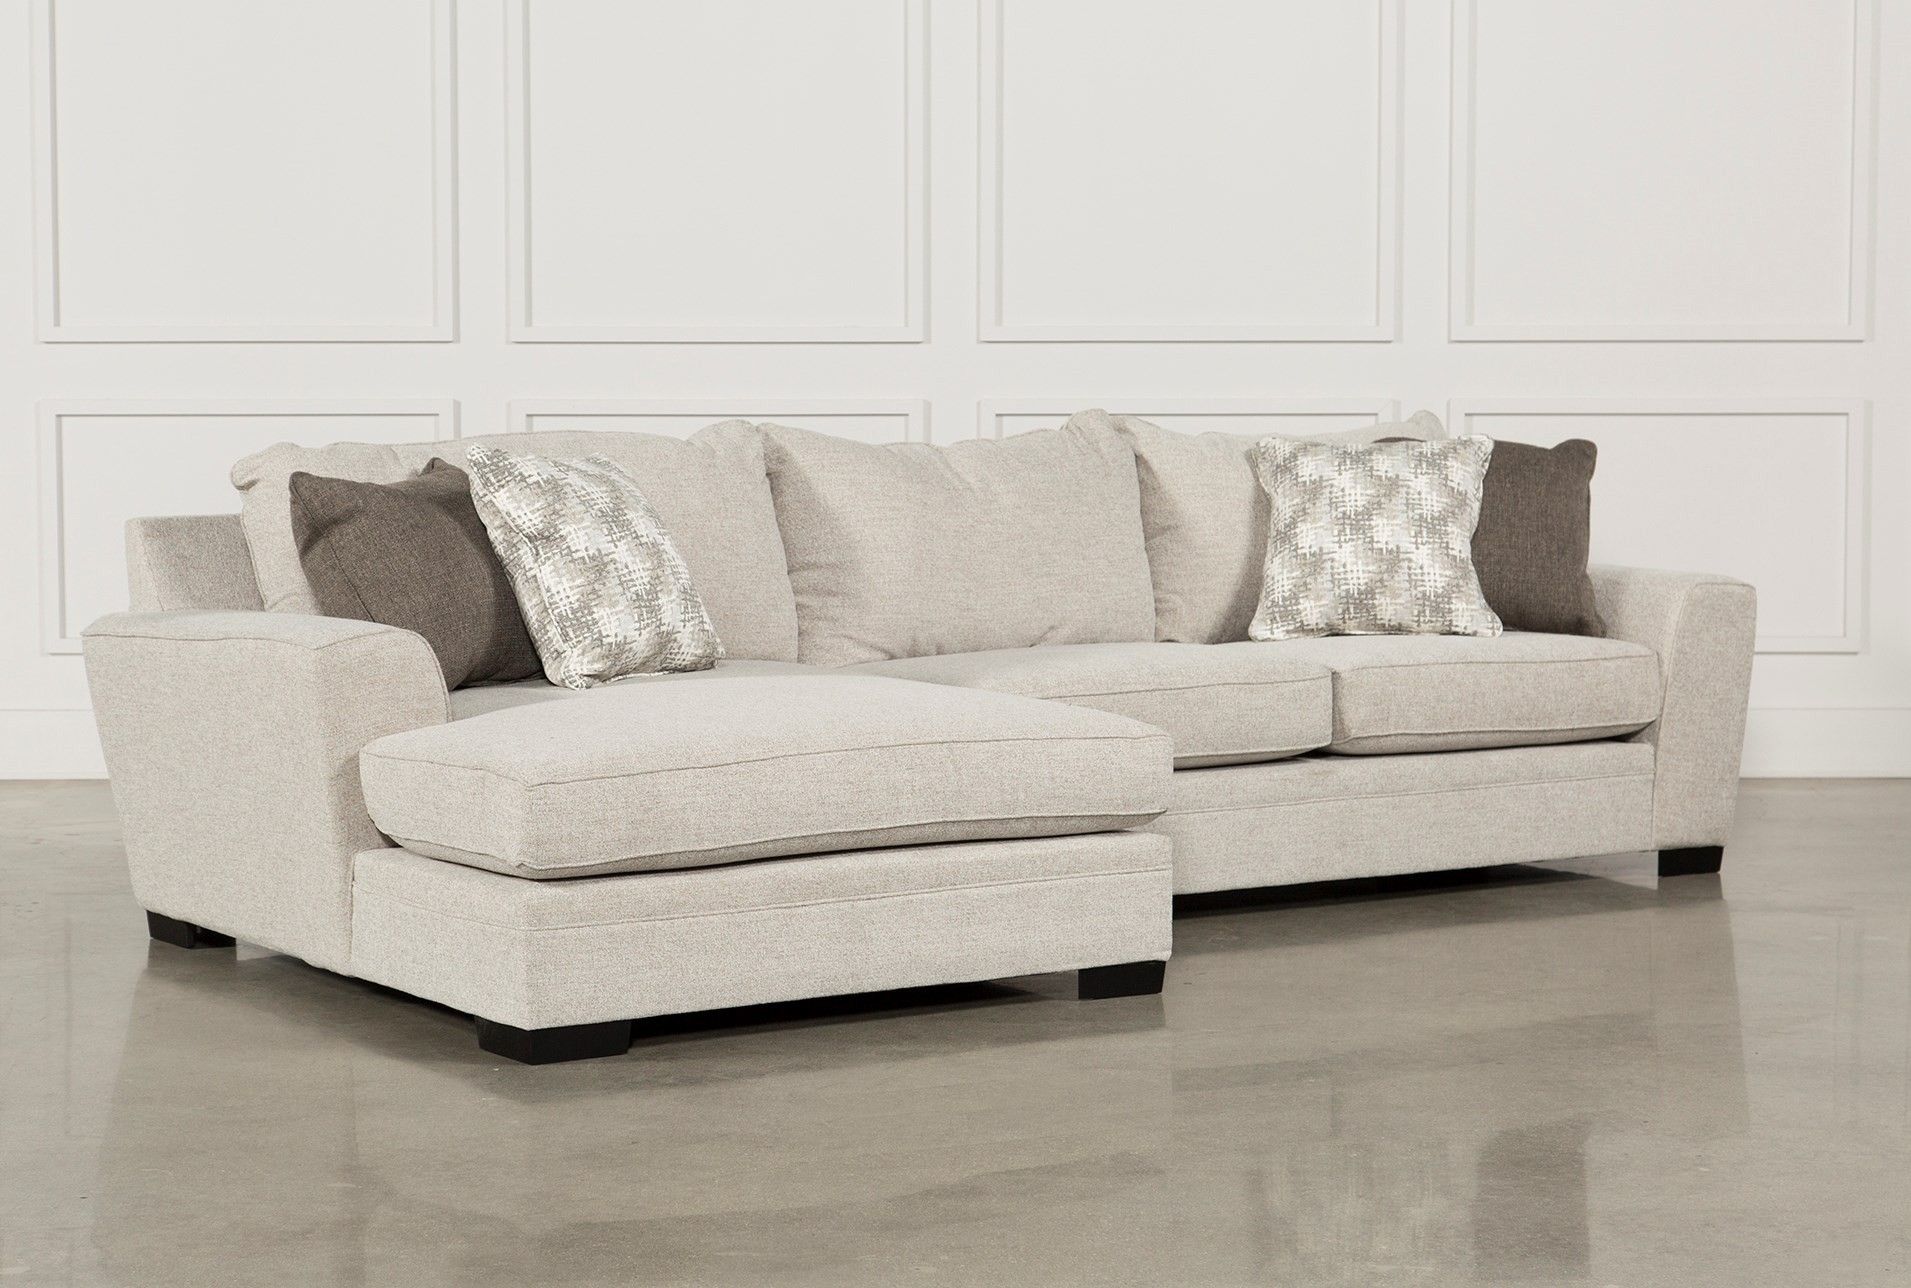 Living Spaces Sectional Sofas Kerri 2 Piece W Raf Chaise 107153 0 Inside Kerri 2 Piece Sectionals With Laf Chaise (View 13 of 30)